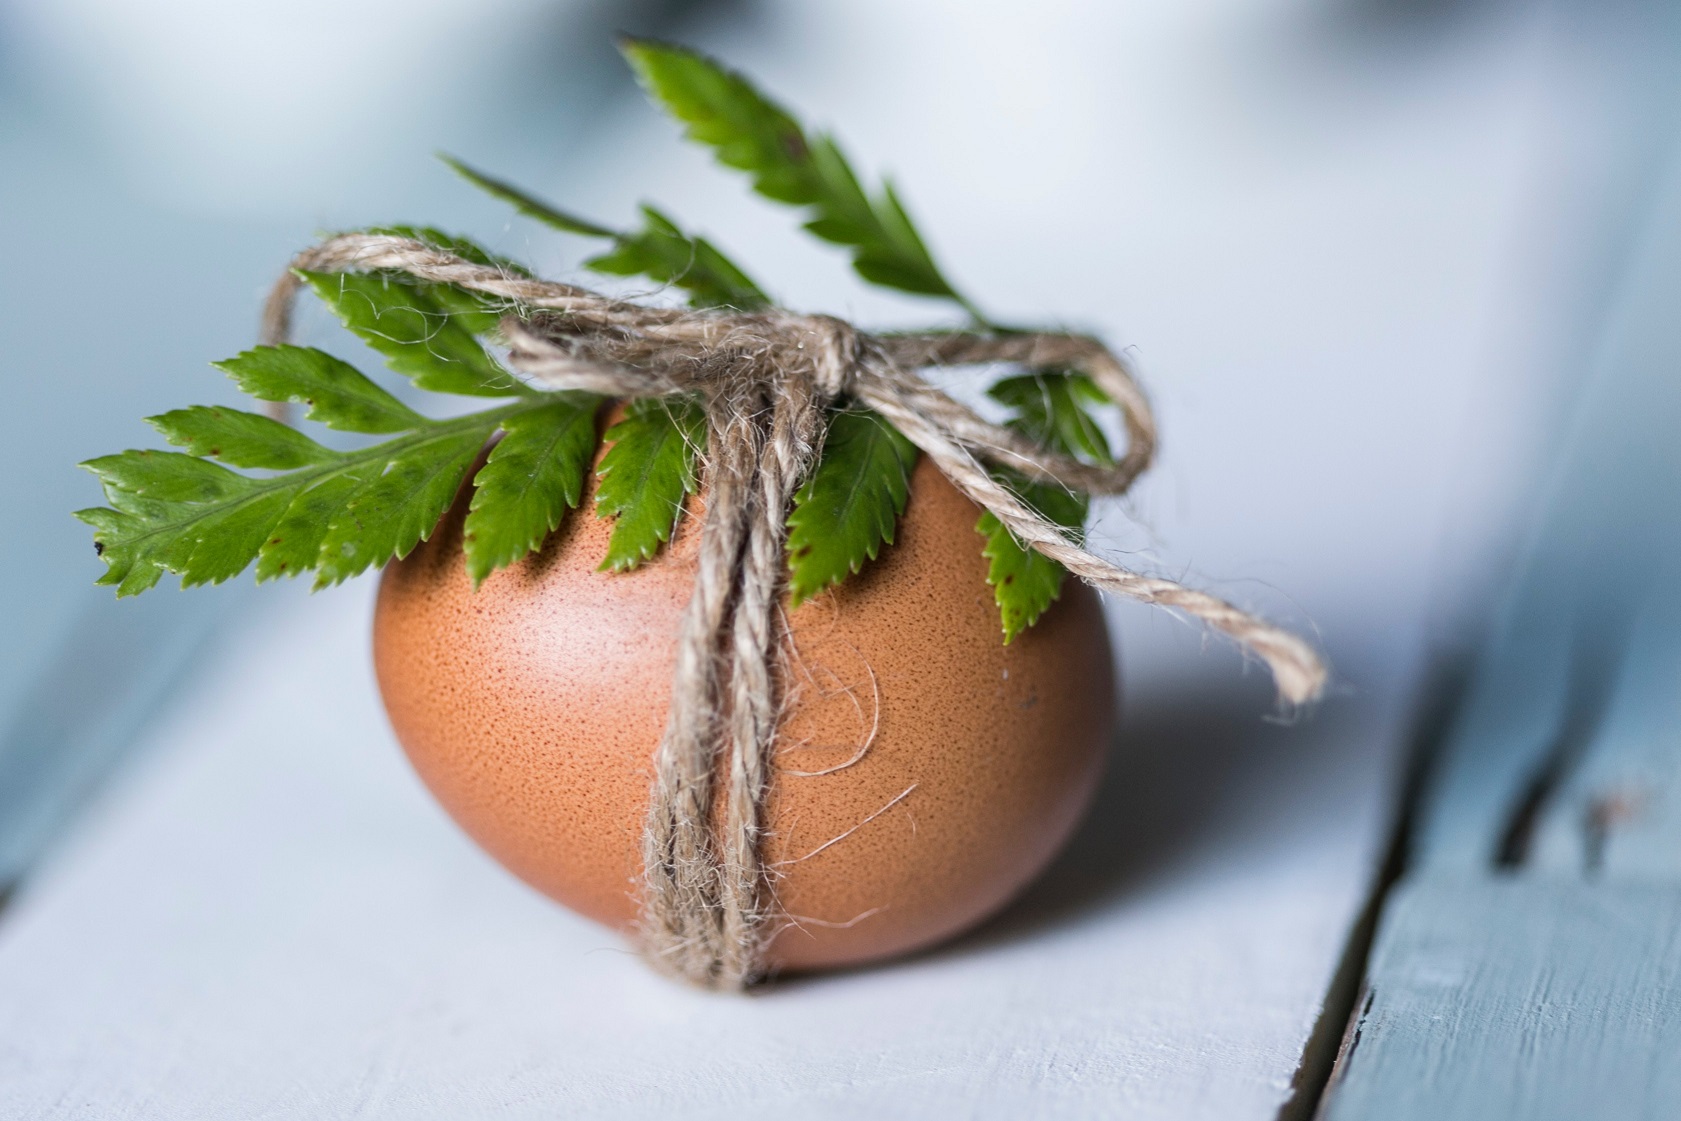 Egg with plant tied around it